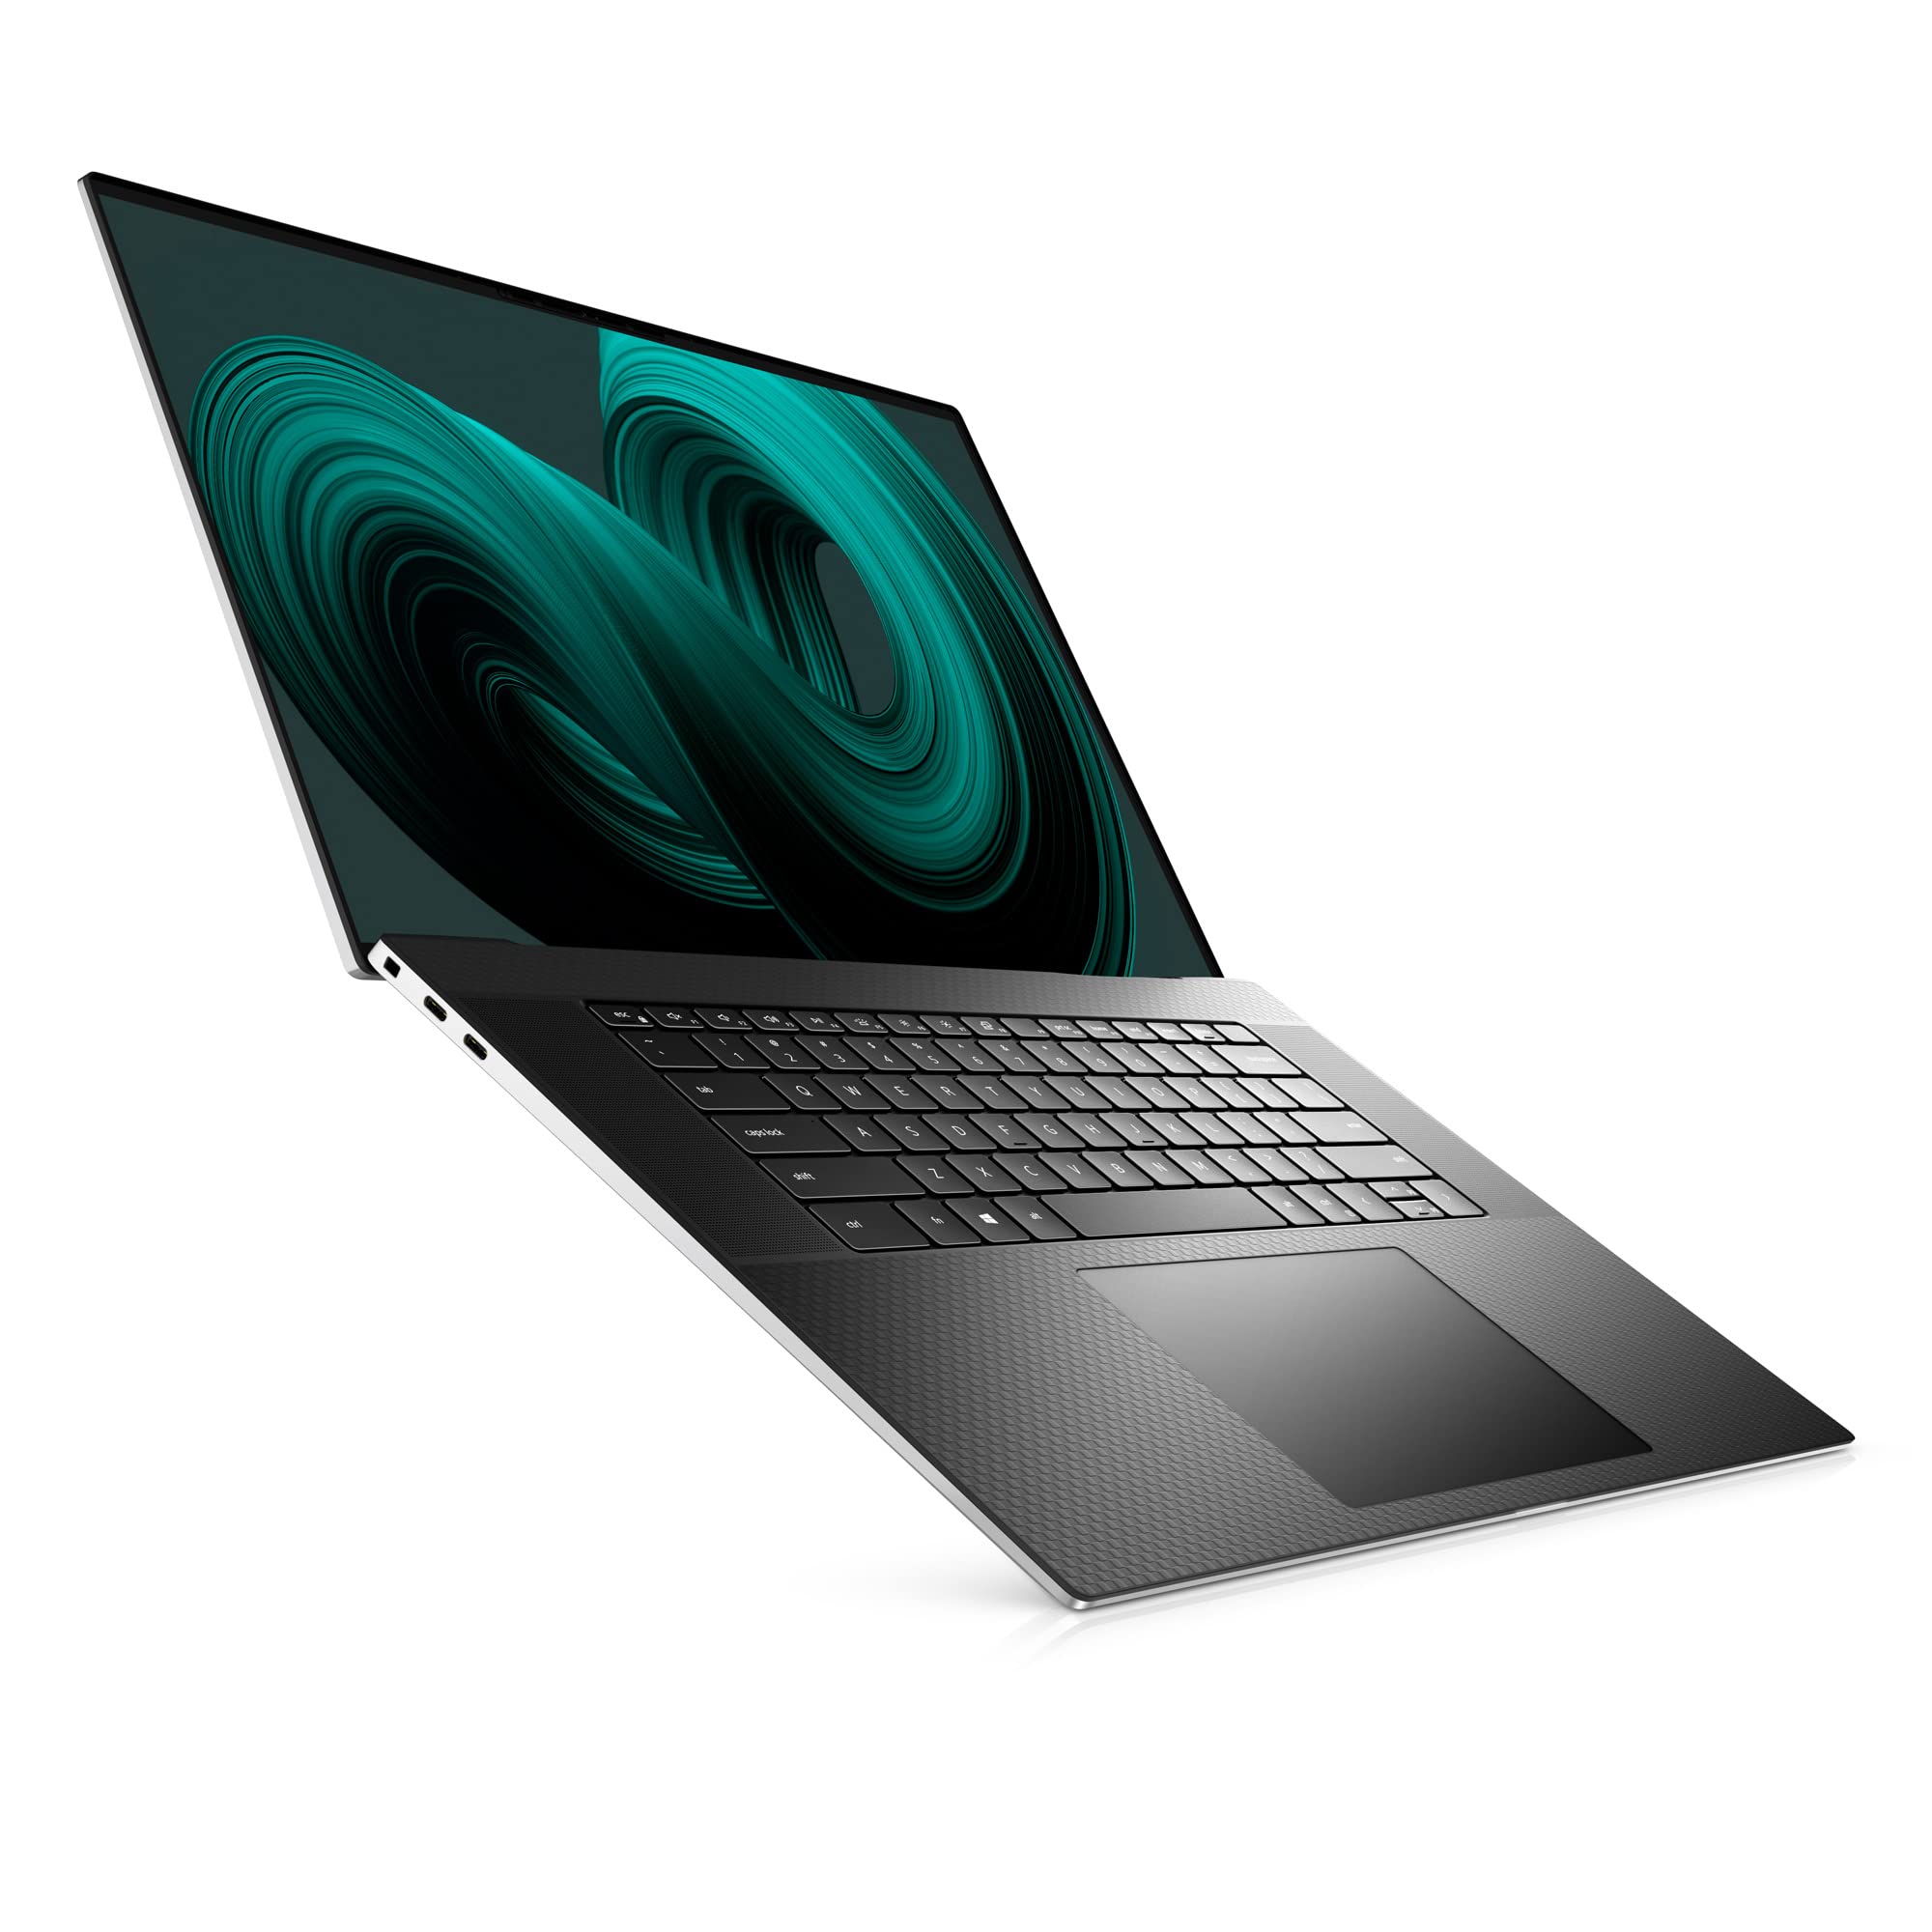 Dell XPS 17 9710, 17 inch UHD+ Touchscreen Laptop - Intel Core i9-11900H, 32GB DDR4 RAM, 1TB SSD, NVIDIA GeForce RTX 3060 6GB GDDR6, Windows 11 Pro - Platinum Silver with Pro Support